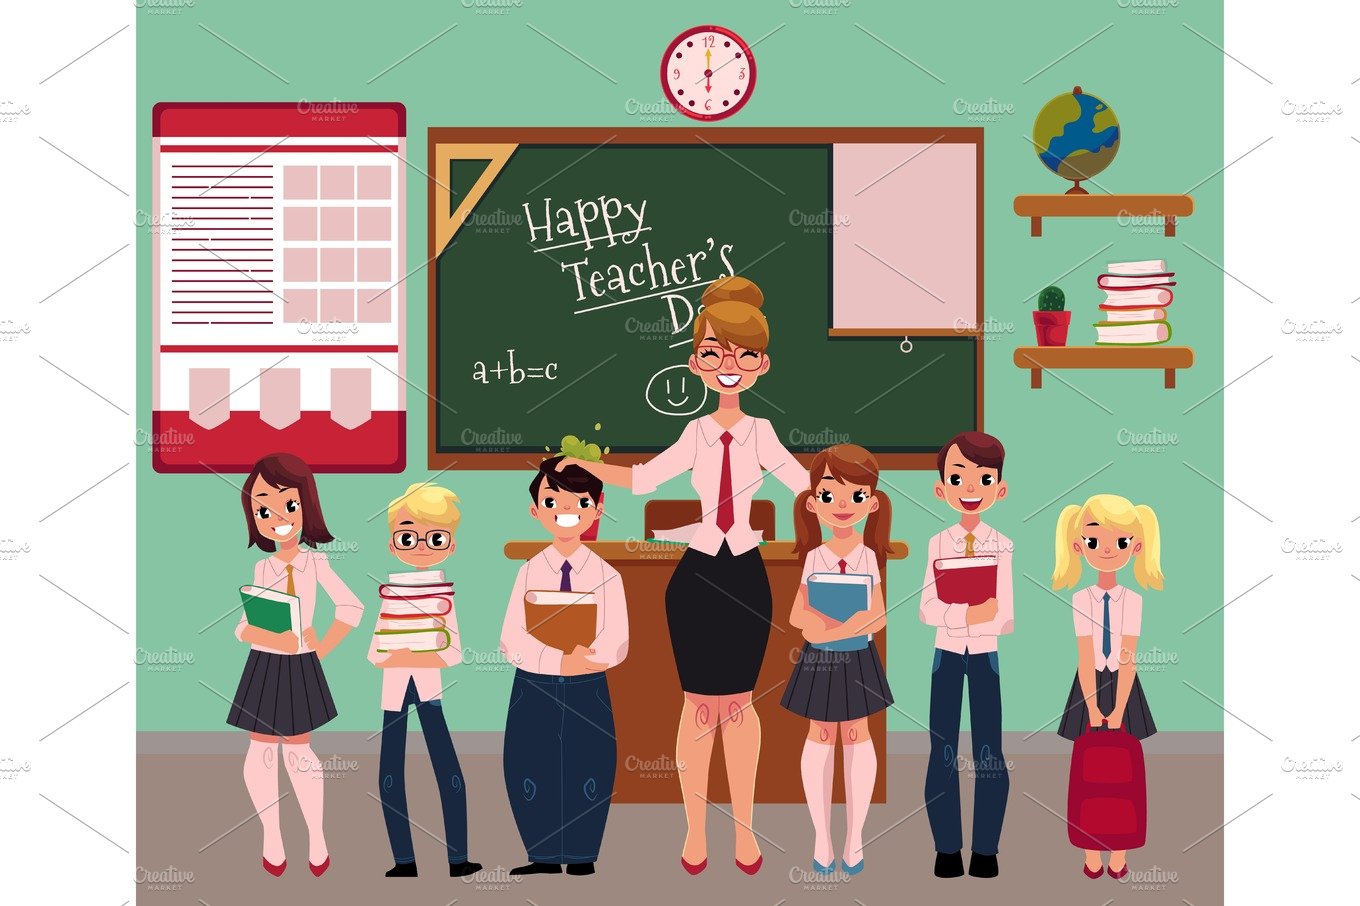 Female teacher standing with students in classroom cover image.